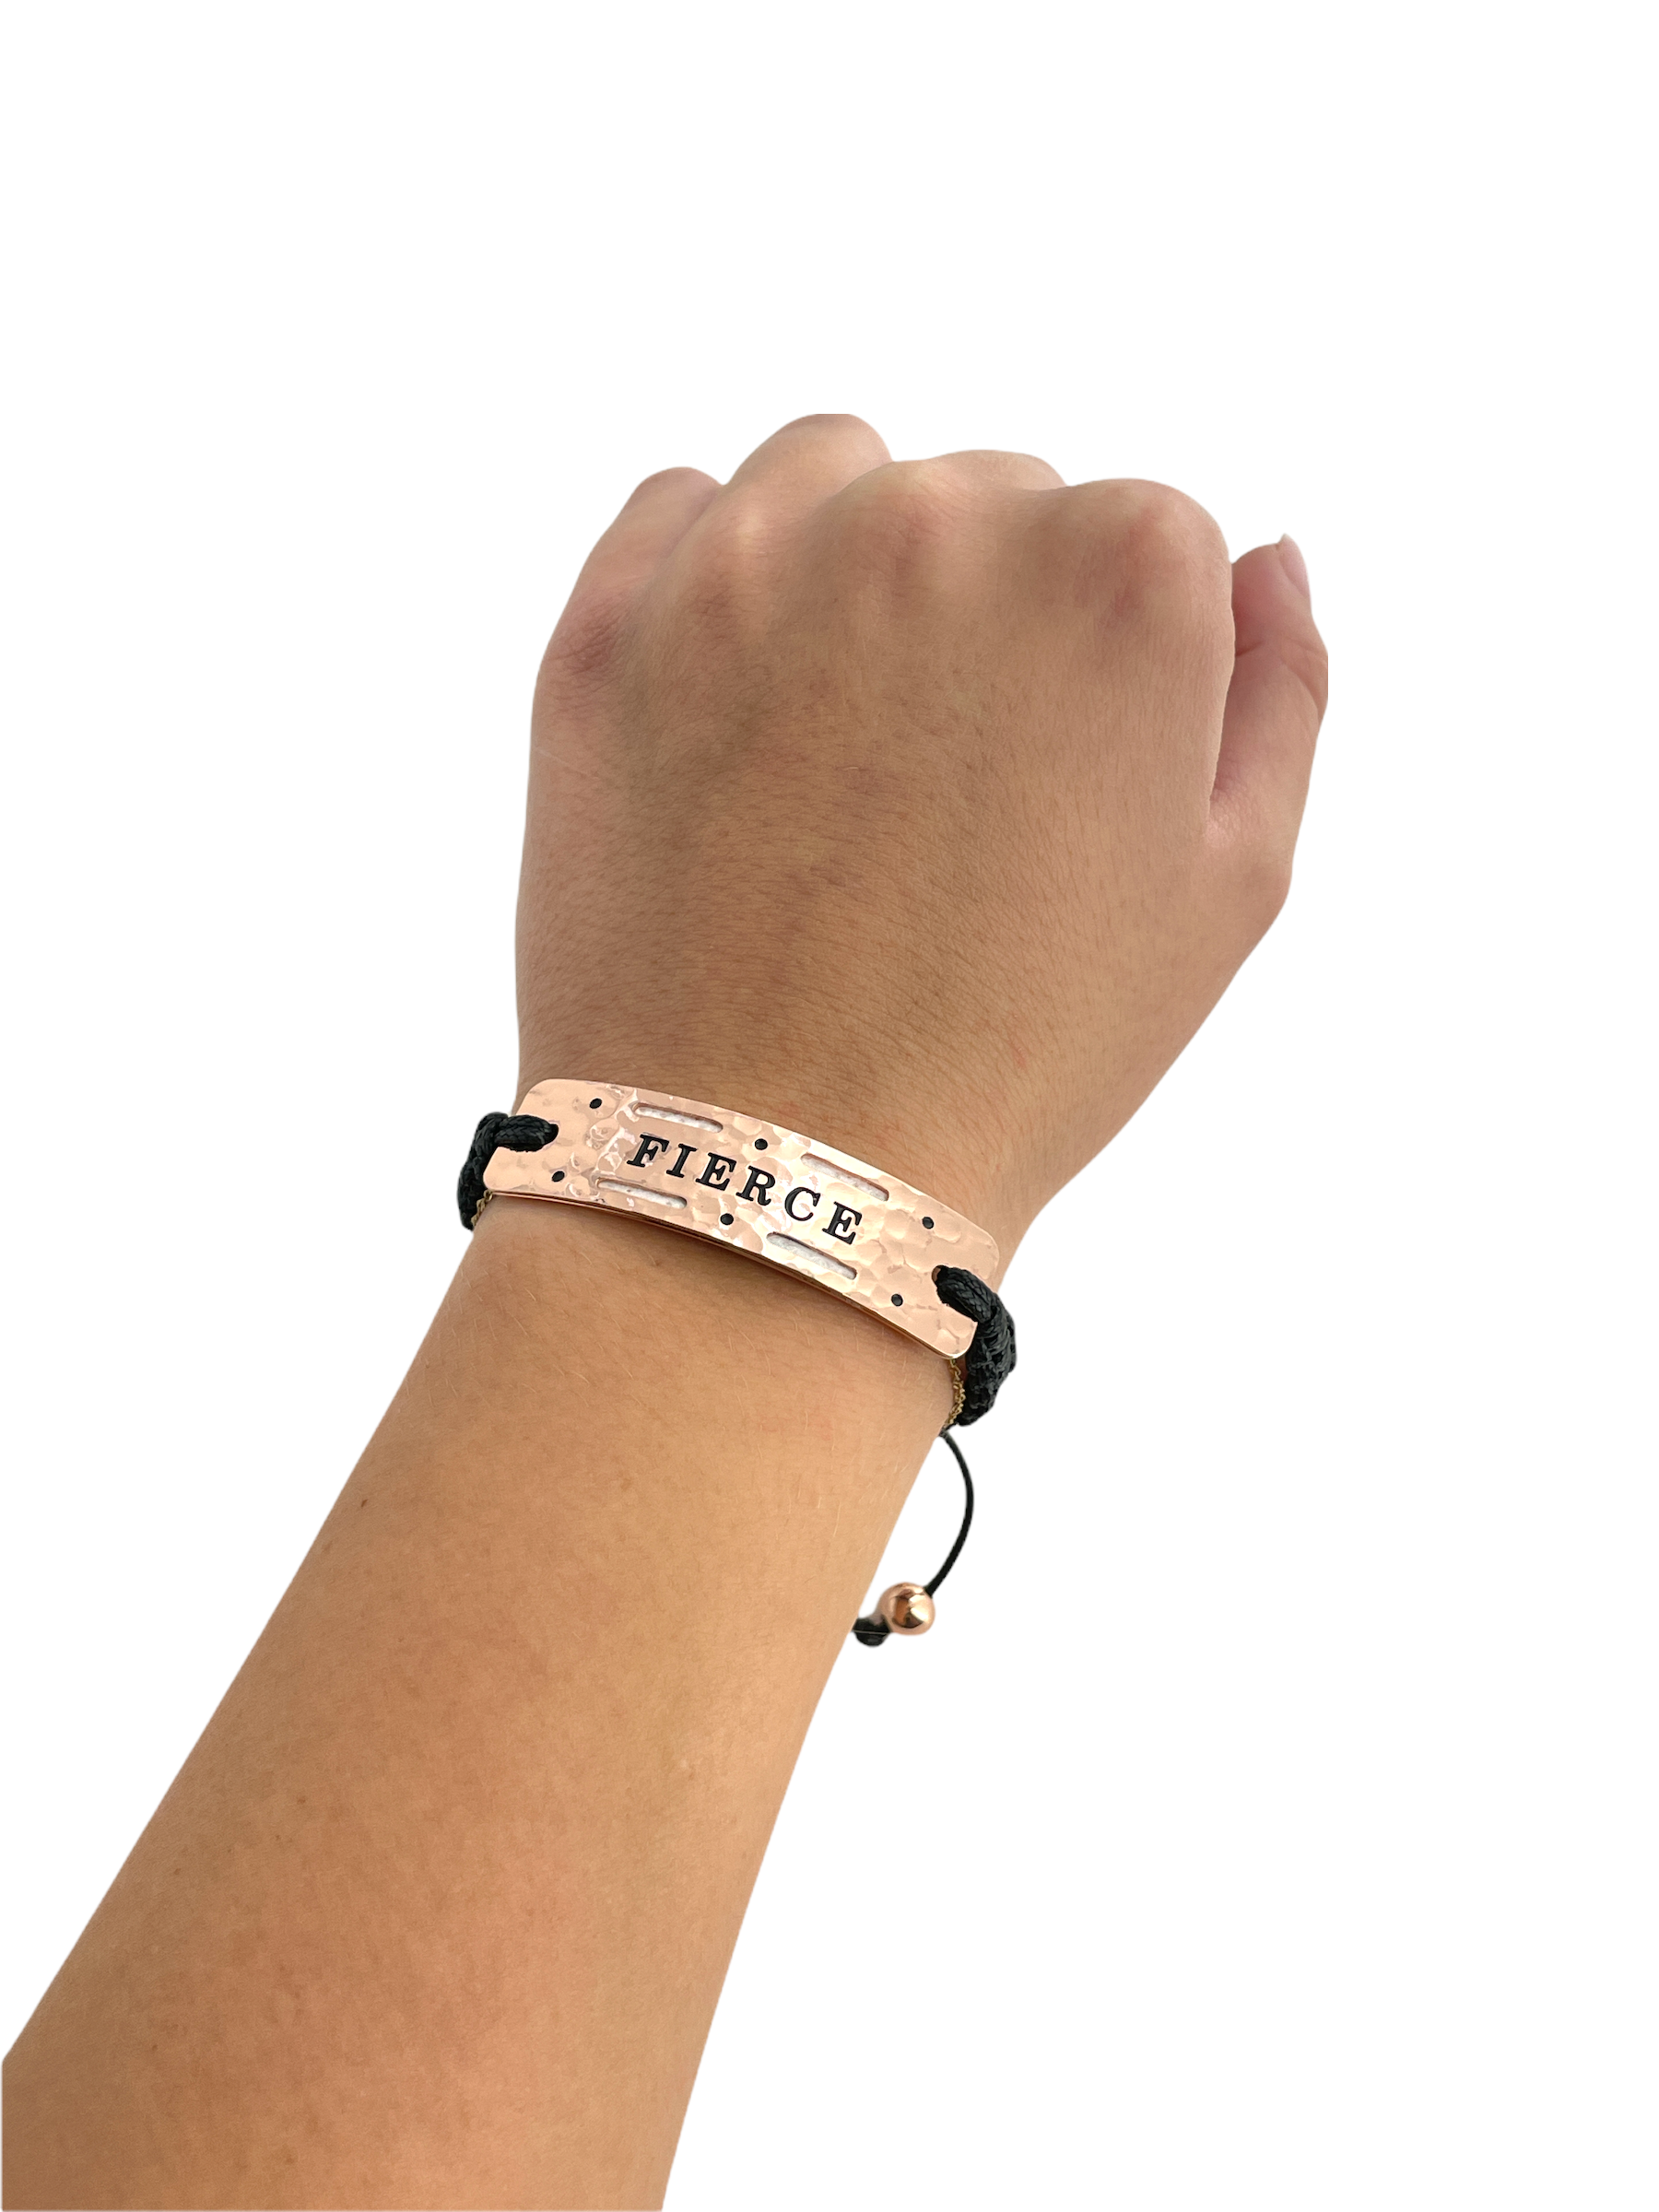 Fierce  - Vented In Brooklyn Power Word Aromatherapy Essential Oil Diffuser Bracelet